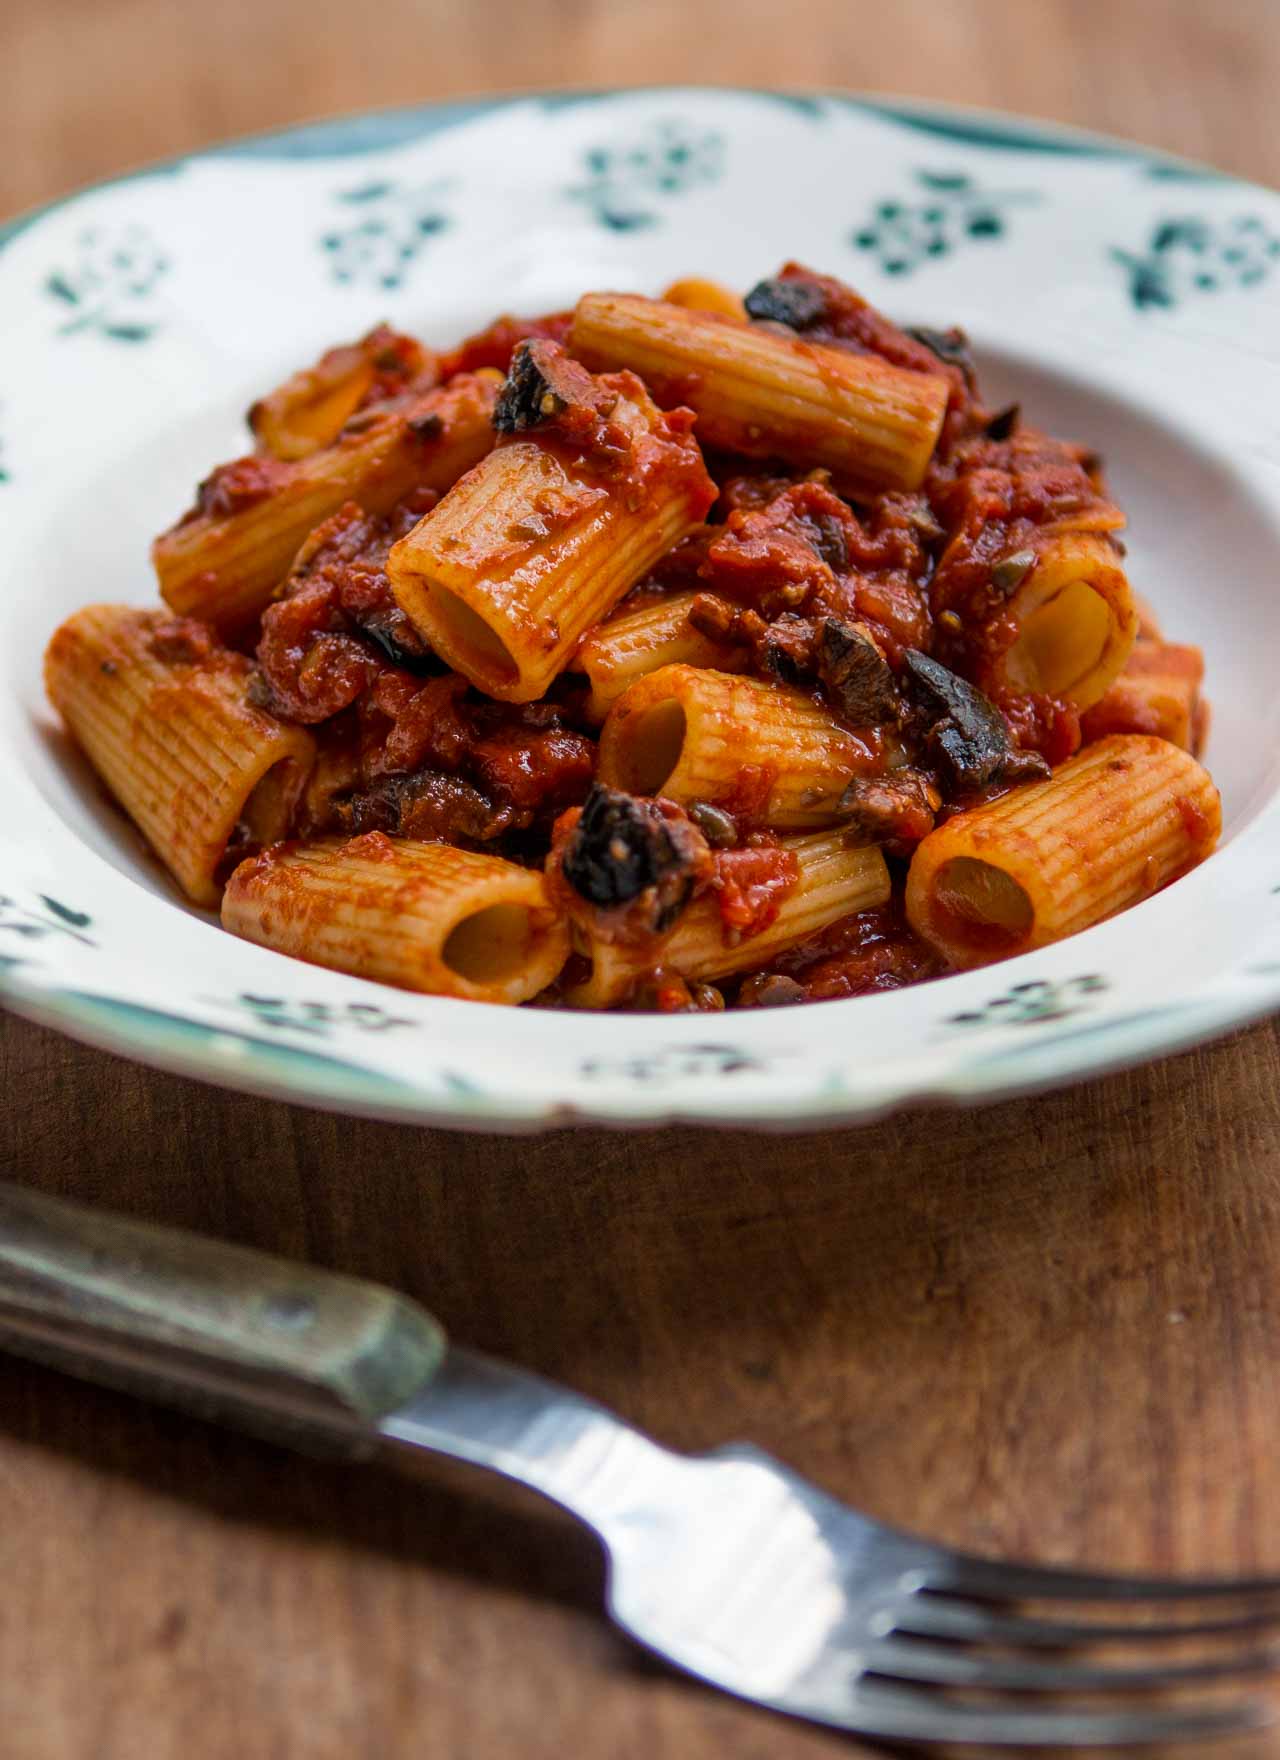 This simple, classic pasta can be made with things you already have on hand!